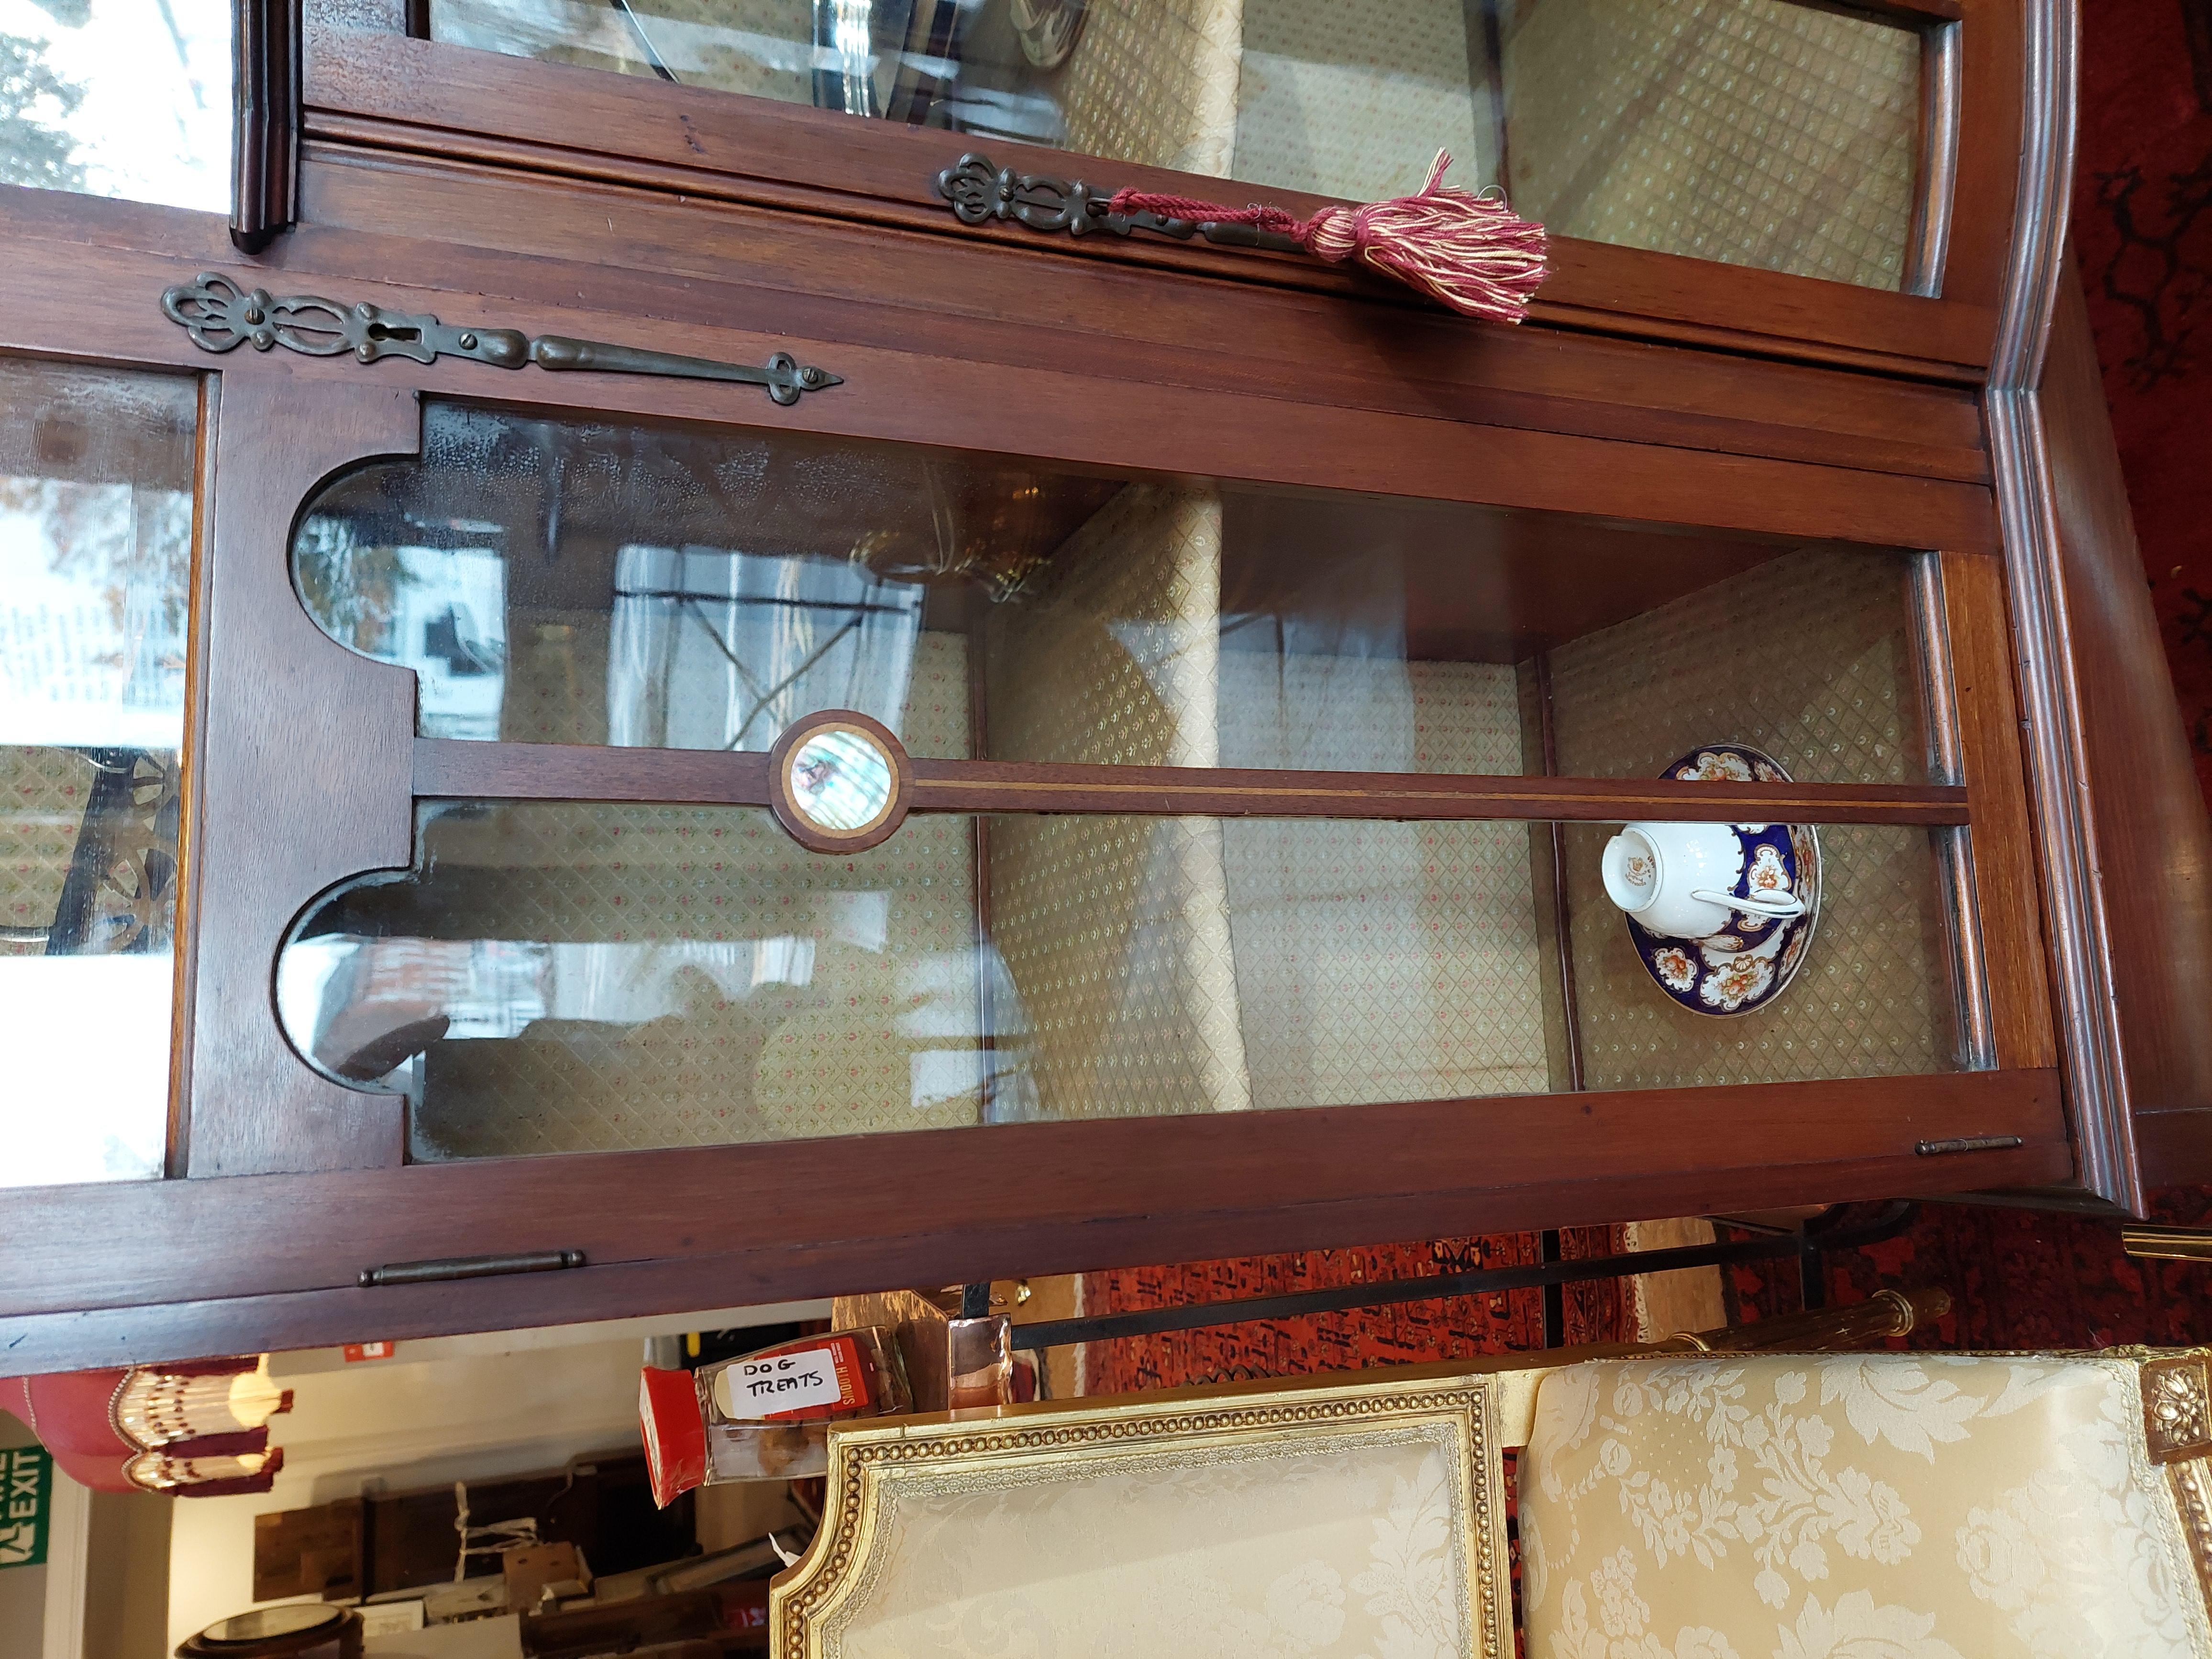 Shapland & Petter Edwardian Mother of Pearl Inlaid Mahogany Display Cabinet In Good Condition For Sale In Altrincham, GB